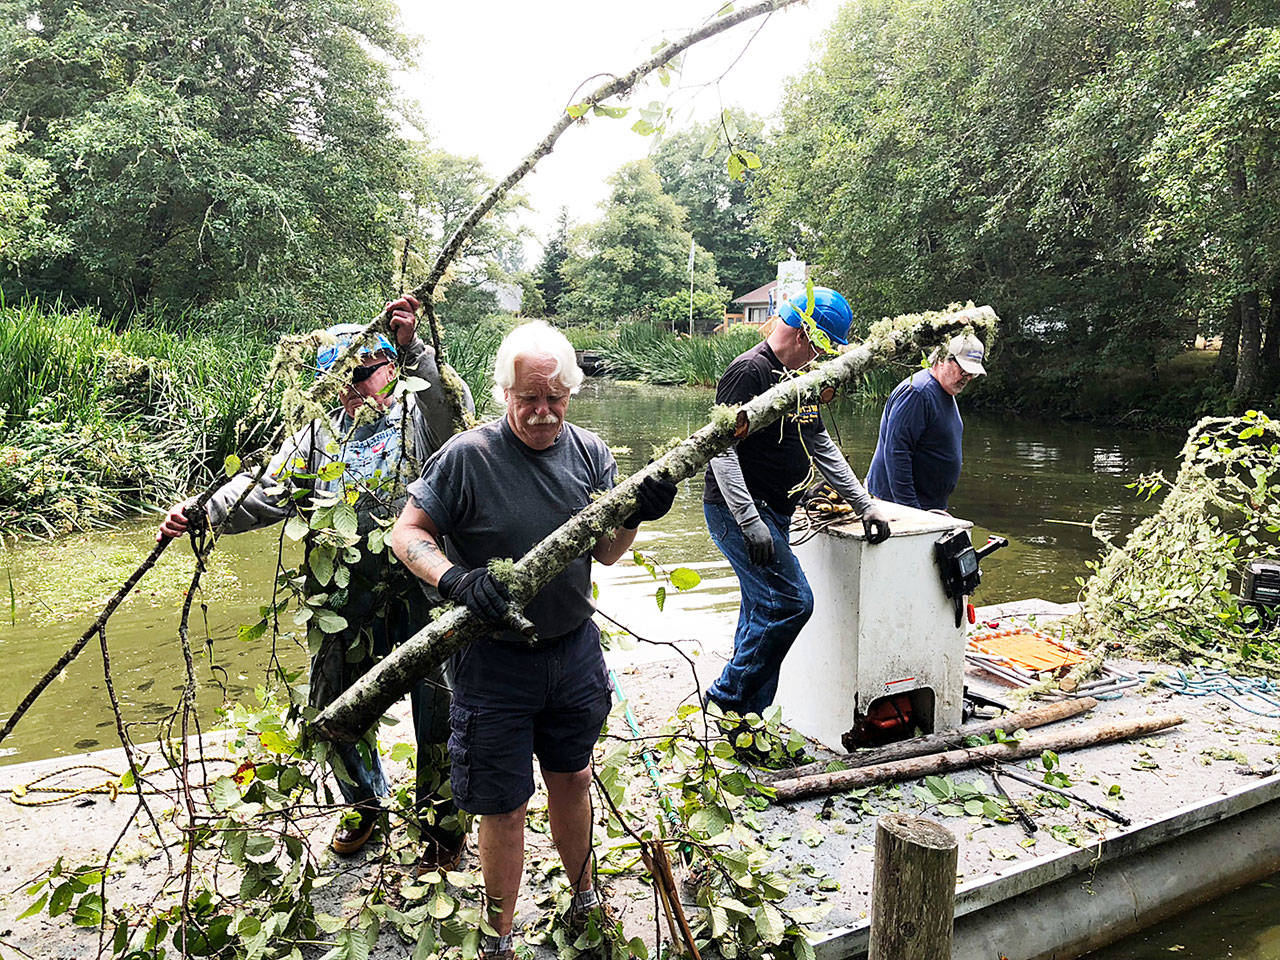 Molly Williams photo: Members of the Fresh Waterways Corp. work along a canal to help clear the debris.